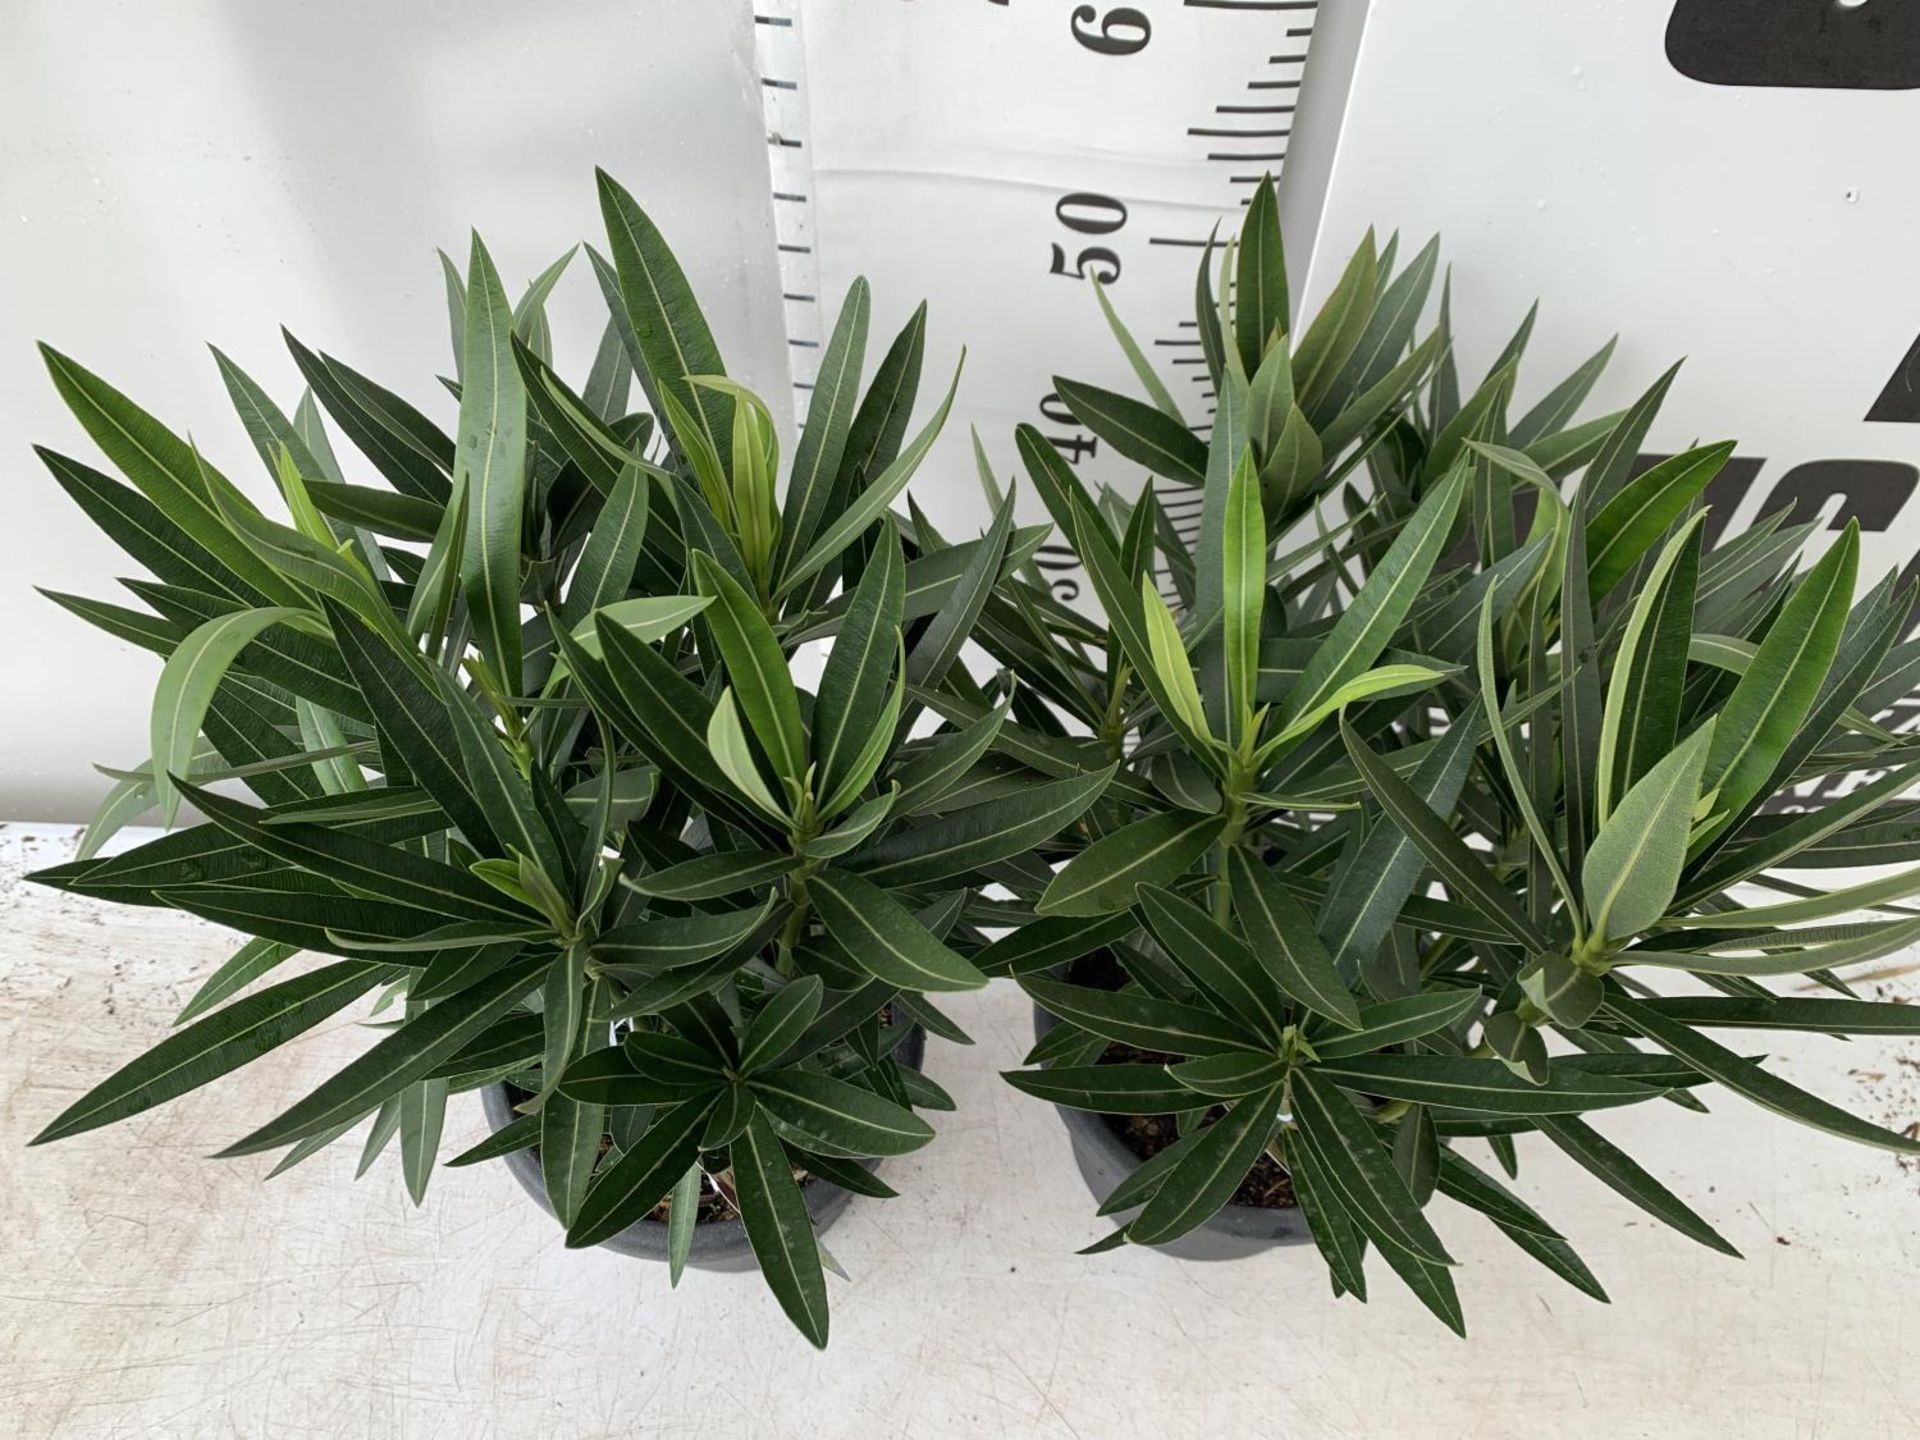 TWO OLEANDER NERIUM SHRUBS MULTICOLOURED APPROX 60CM TALL IN 4 LTR POTS PLUS VAT TO BE SOLD FOR - Image 2 of 5